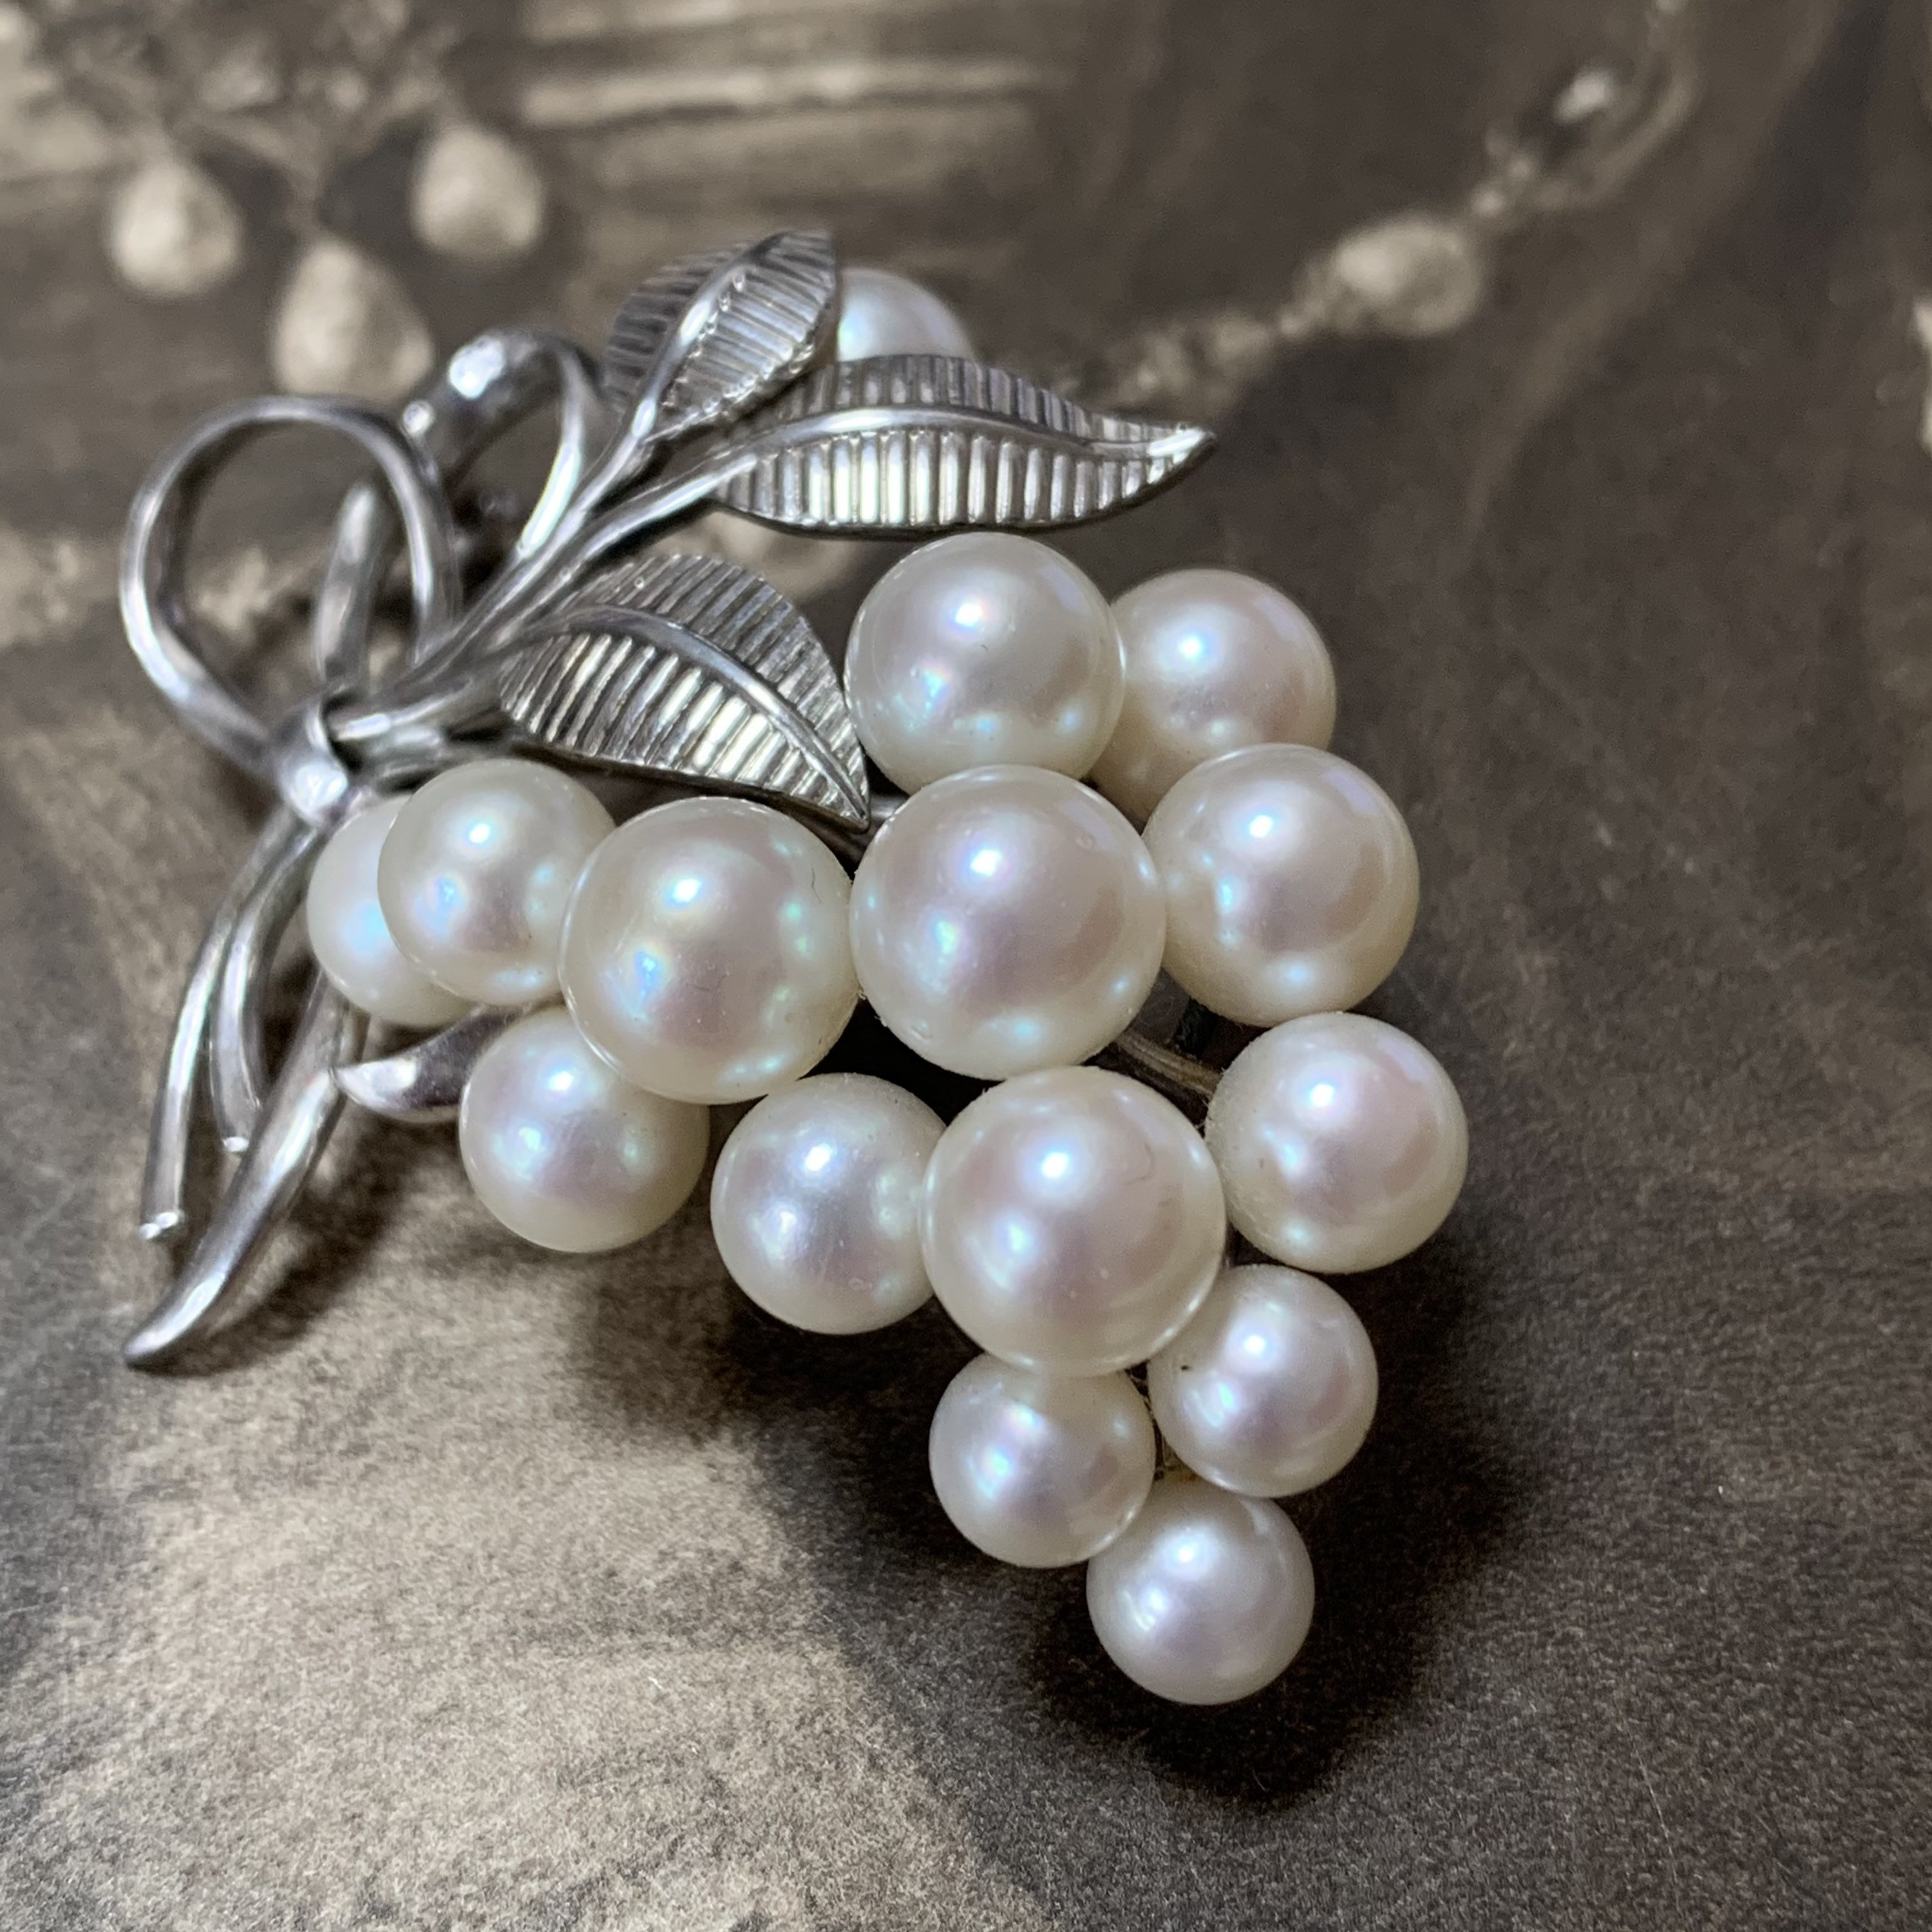 Vintage Mikimoto Pearl Brooch With Large Floral Spray Design Of 15 Beautiful Akoya Pearls Set in Silver The Original Box